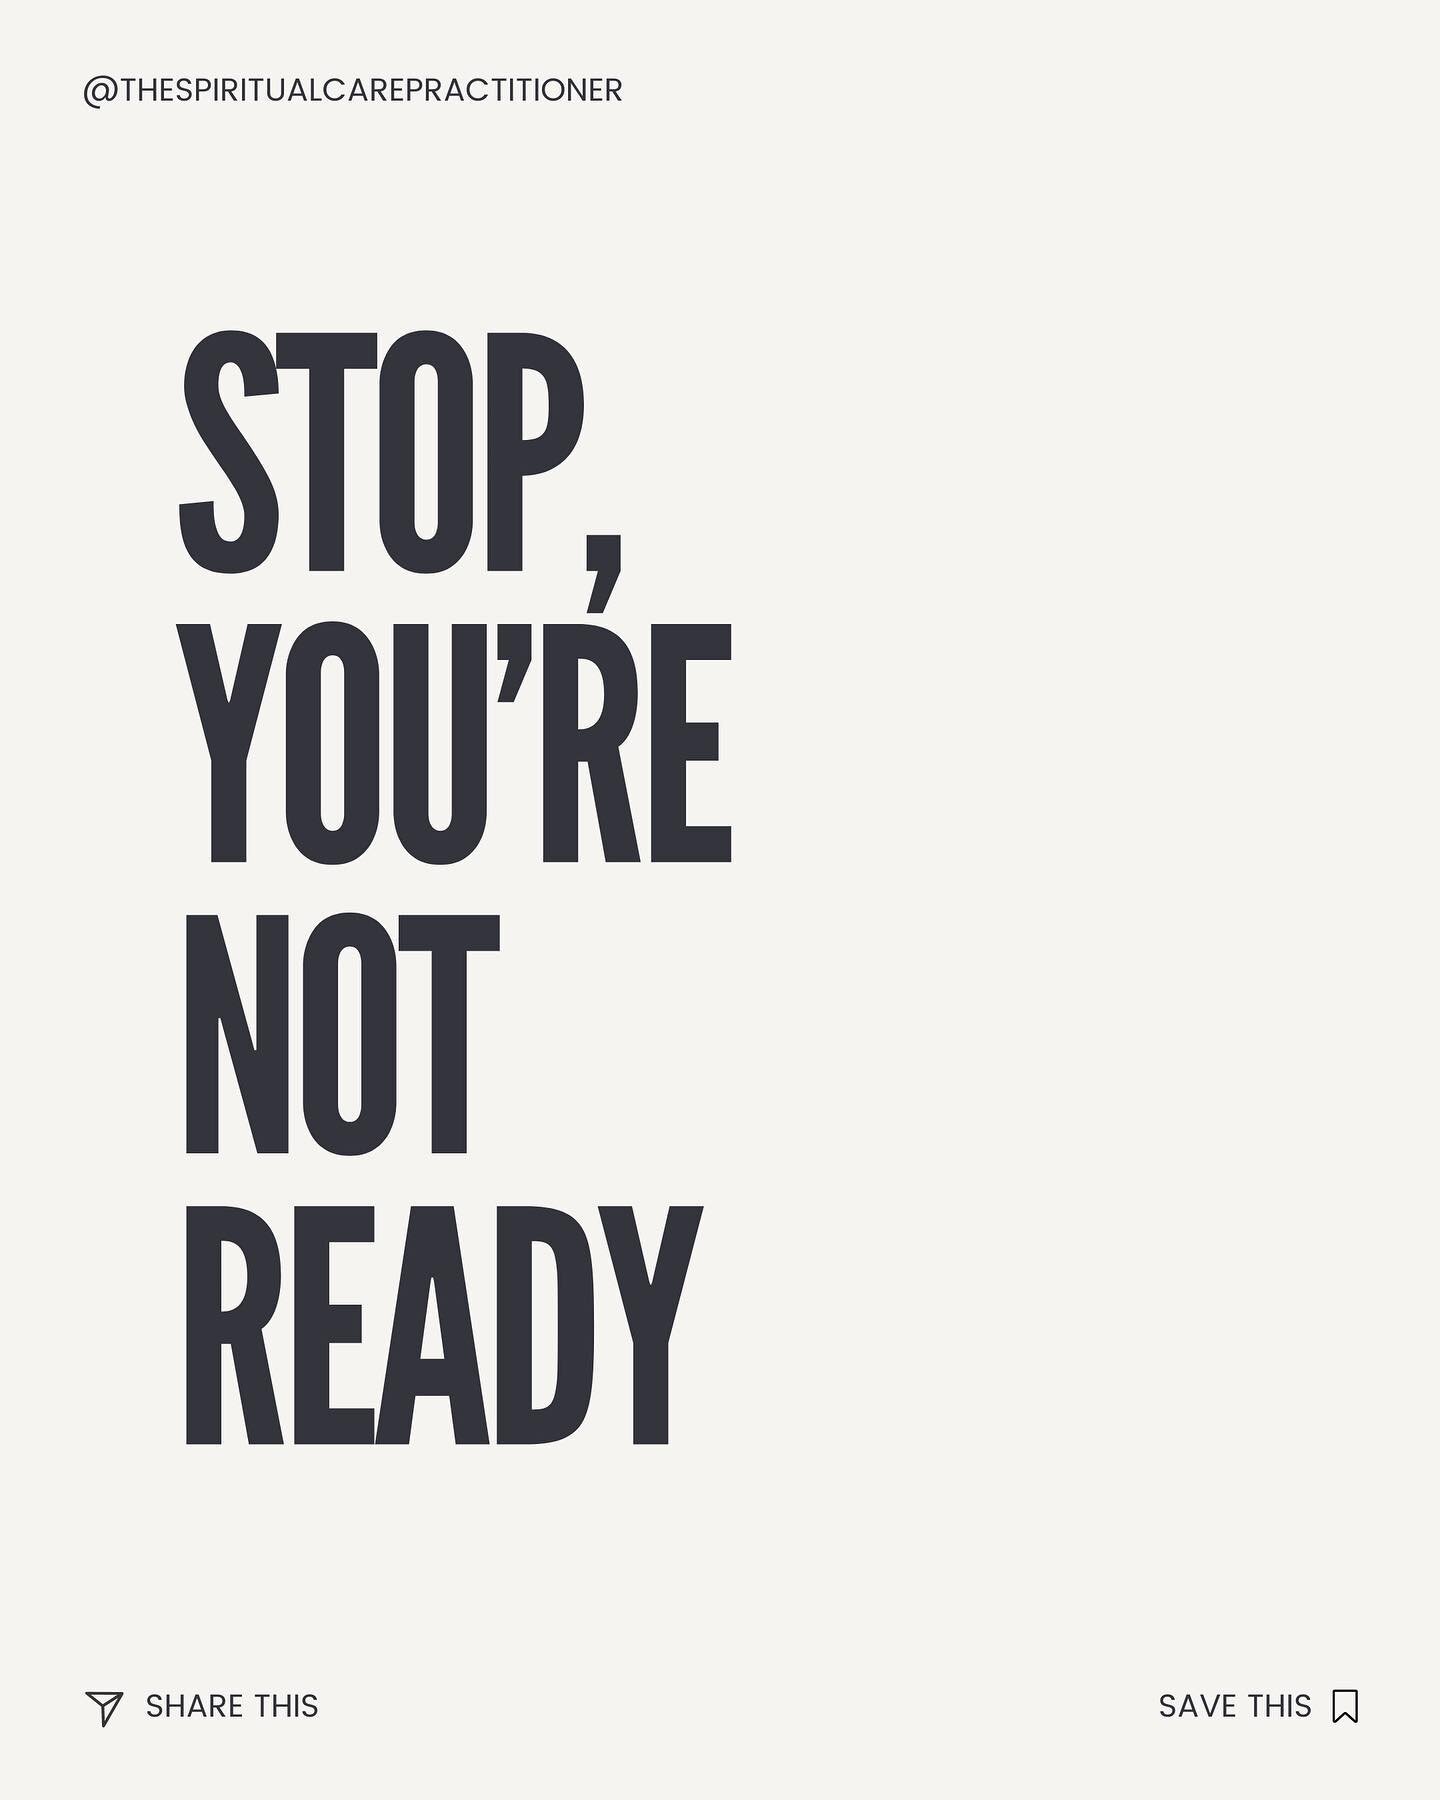 Stop. You&rsquo;re not ready to go there and it&rsquo;s okay to turn around and go back.

No shame.

No frustration.

Do the work to get ready and try again.

New reflection out on The Spiritual Care Practitioner - the link is in my bio.

#thespiritu